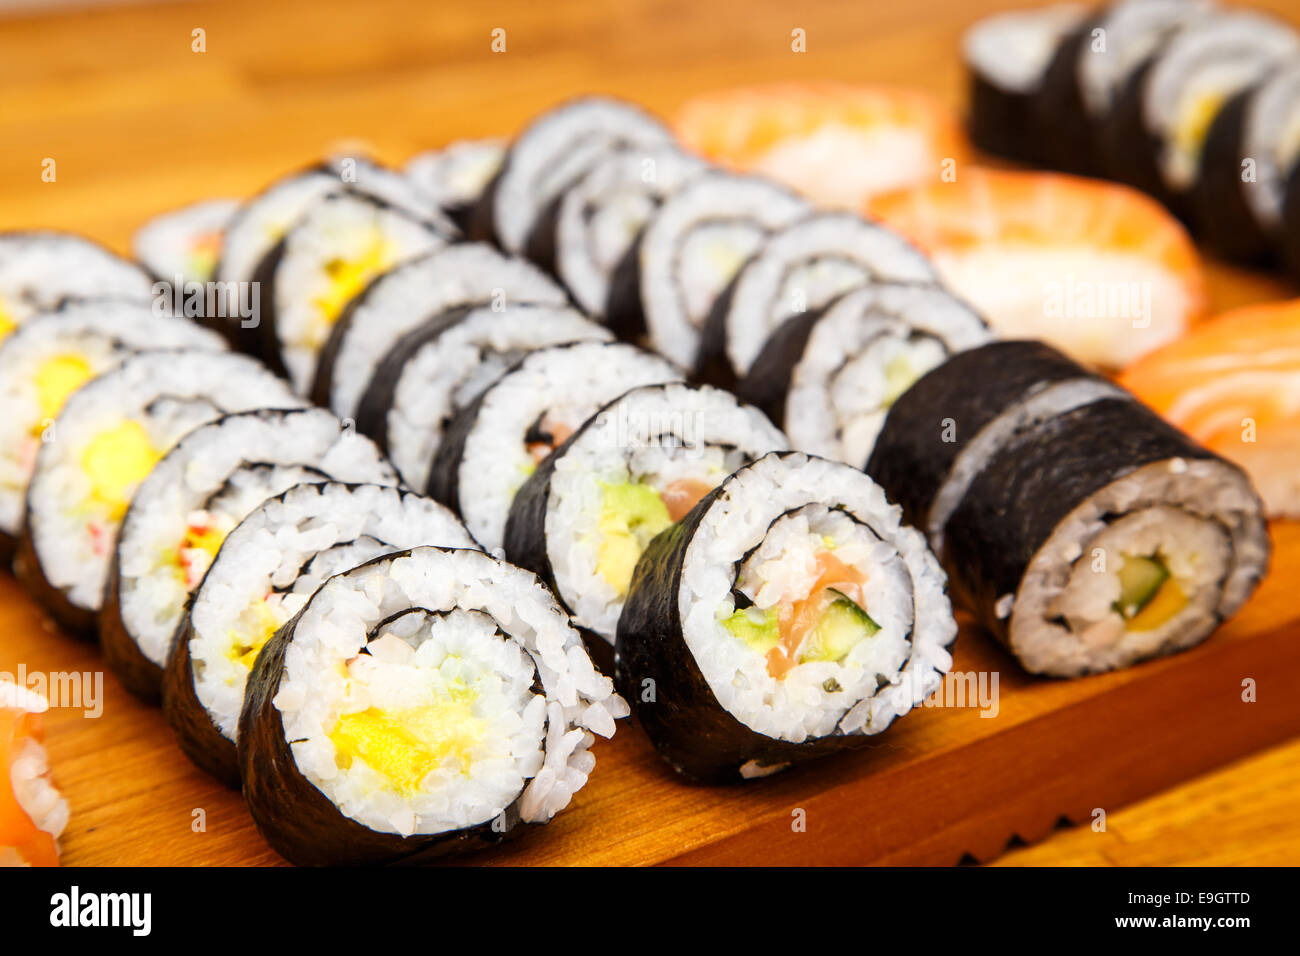 home made sushi, ready to eat Stock Photo